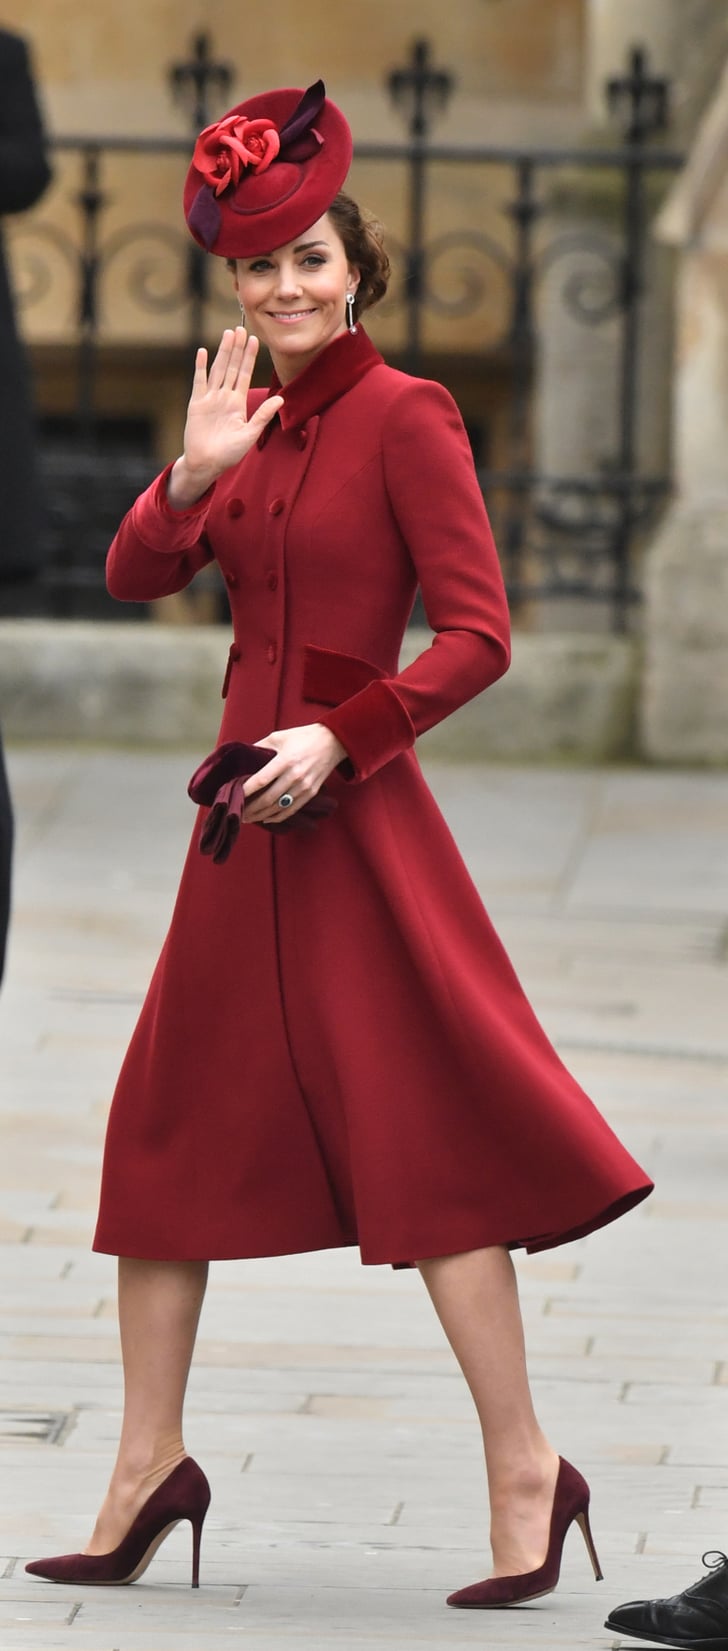 Kate Middleton's Red Outfit at Commonwealth Day | POPSUGAR Fashion